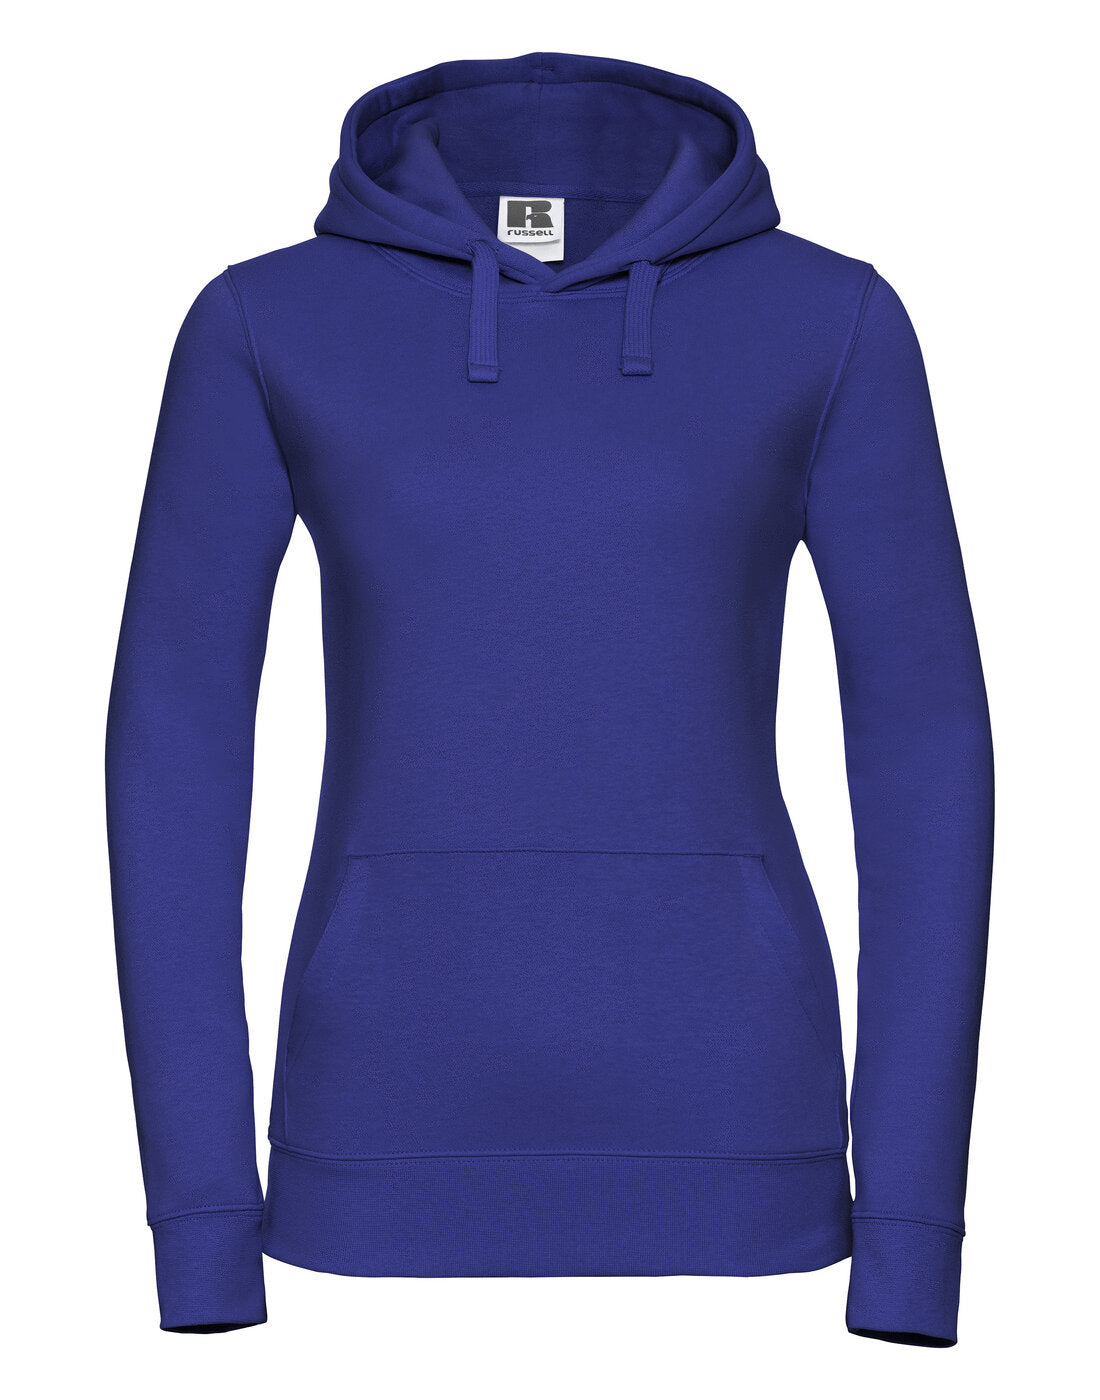 Russell Ladies Authentic Hoodie Bright Royal